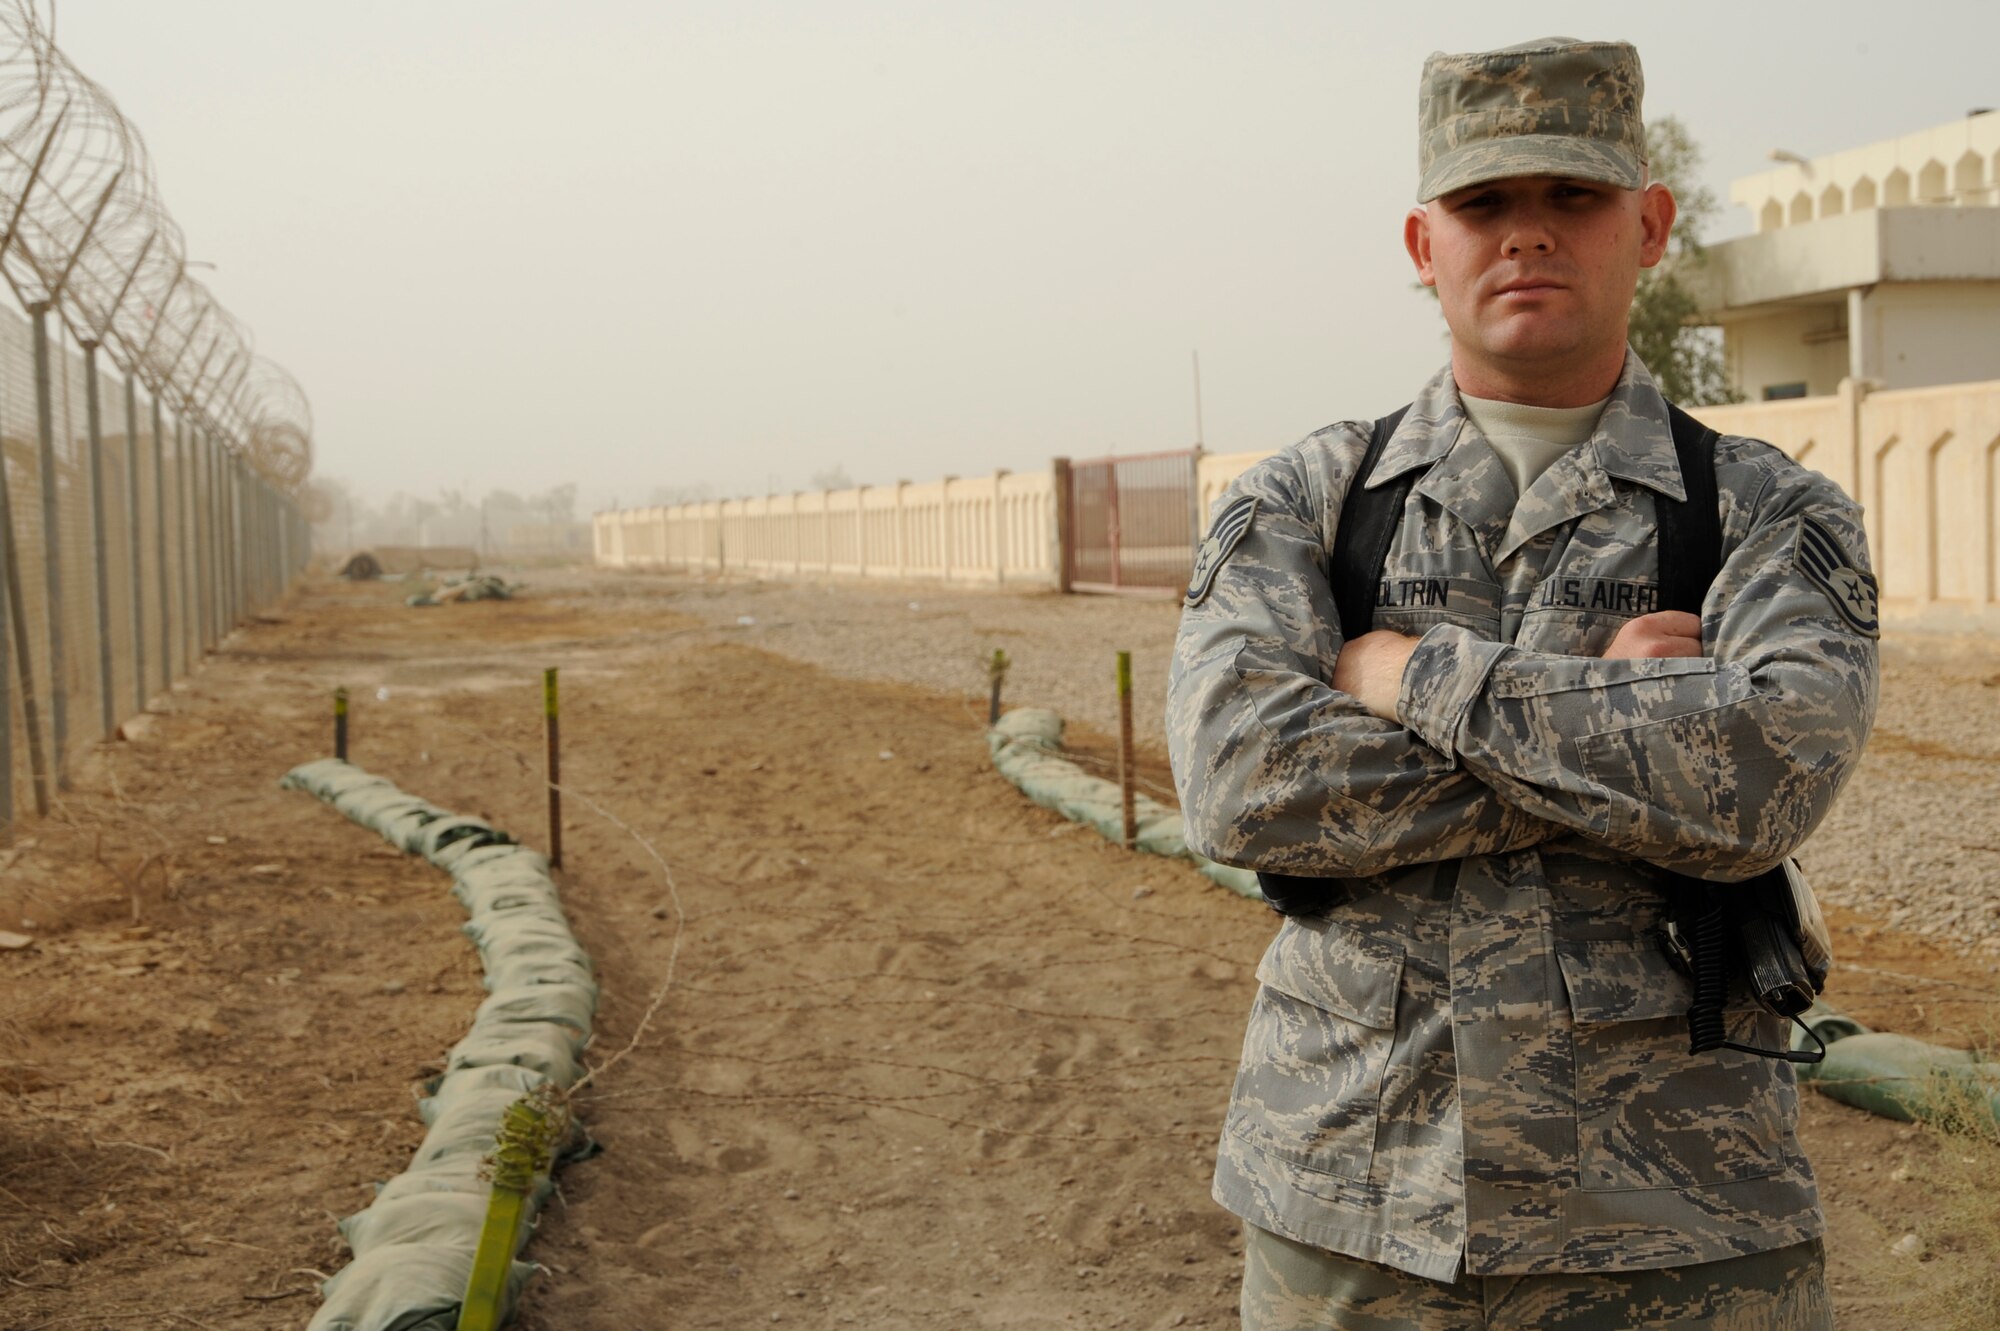 AL TAJI AIR BASE, Iraq -- U.S. Air Force Staff Sgt. Matthew Coltrin, a military training instructor air advisor with the 370th Expeditionary Training Squadron, poses for a photo at the Iraqi basic military training tactical course. Coltrin, a Lake Charles, La. native, is deployed from the 322nd Training Squadron, Lackland Air Force Base, Texas. (U.S. Air Force photo/Staff Sgt. Paul Villanueva II)